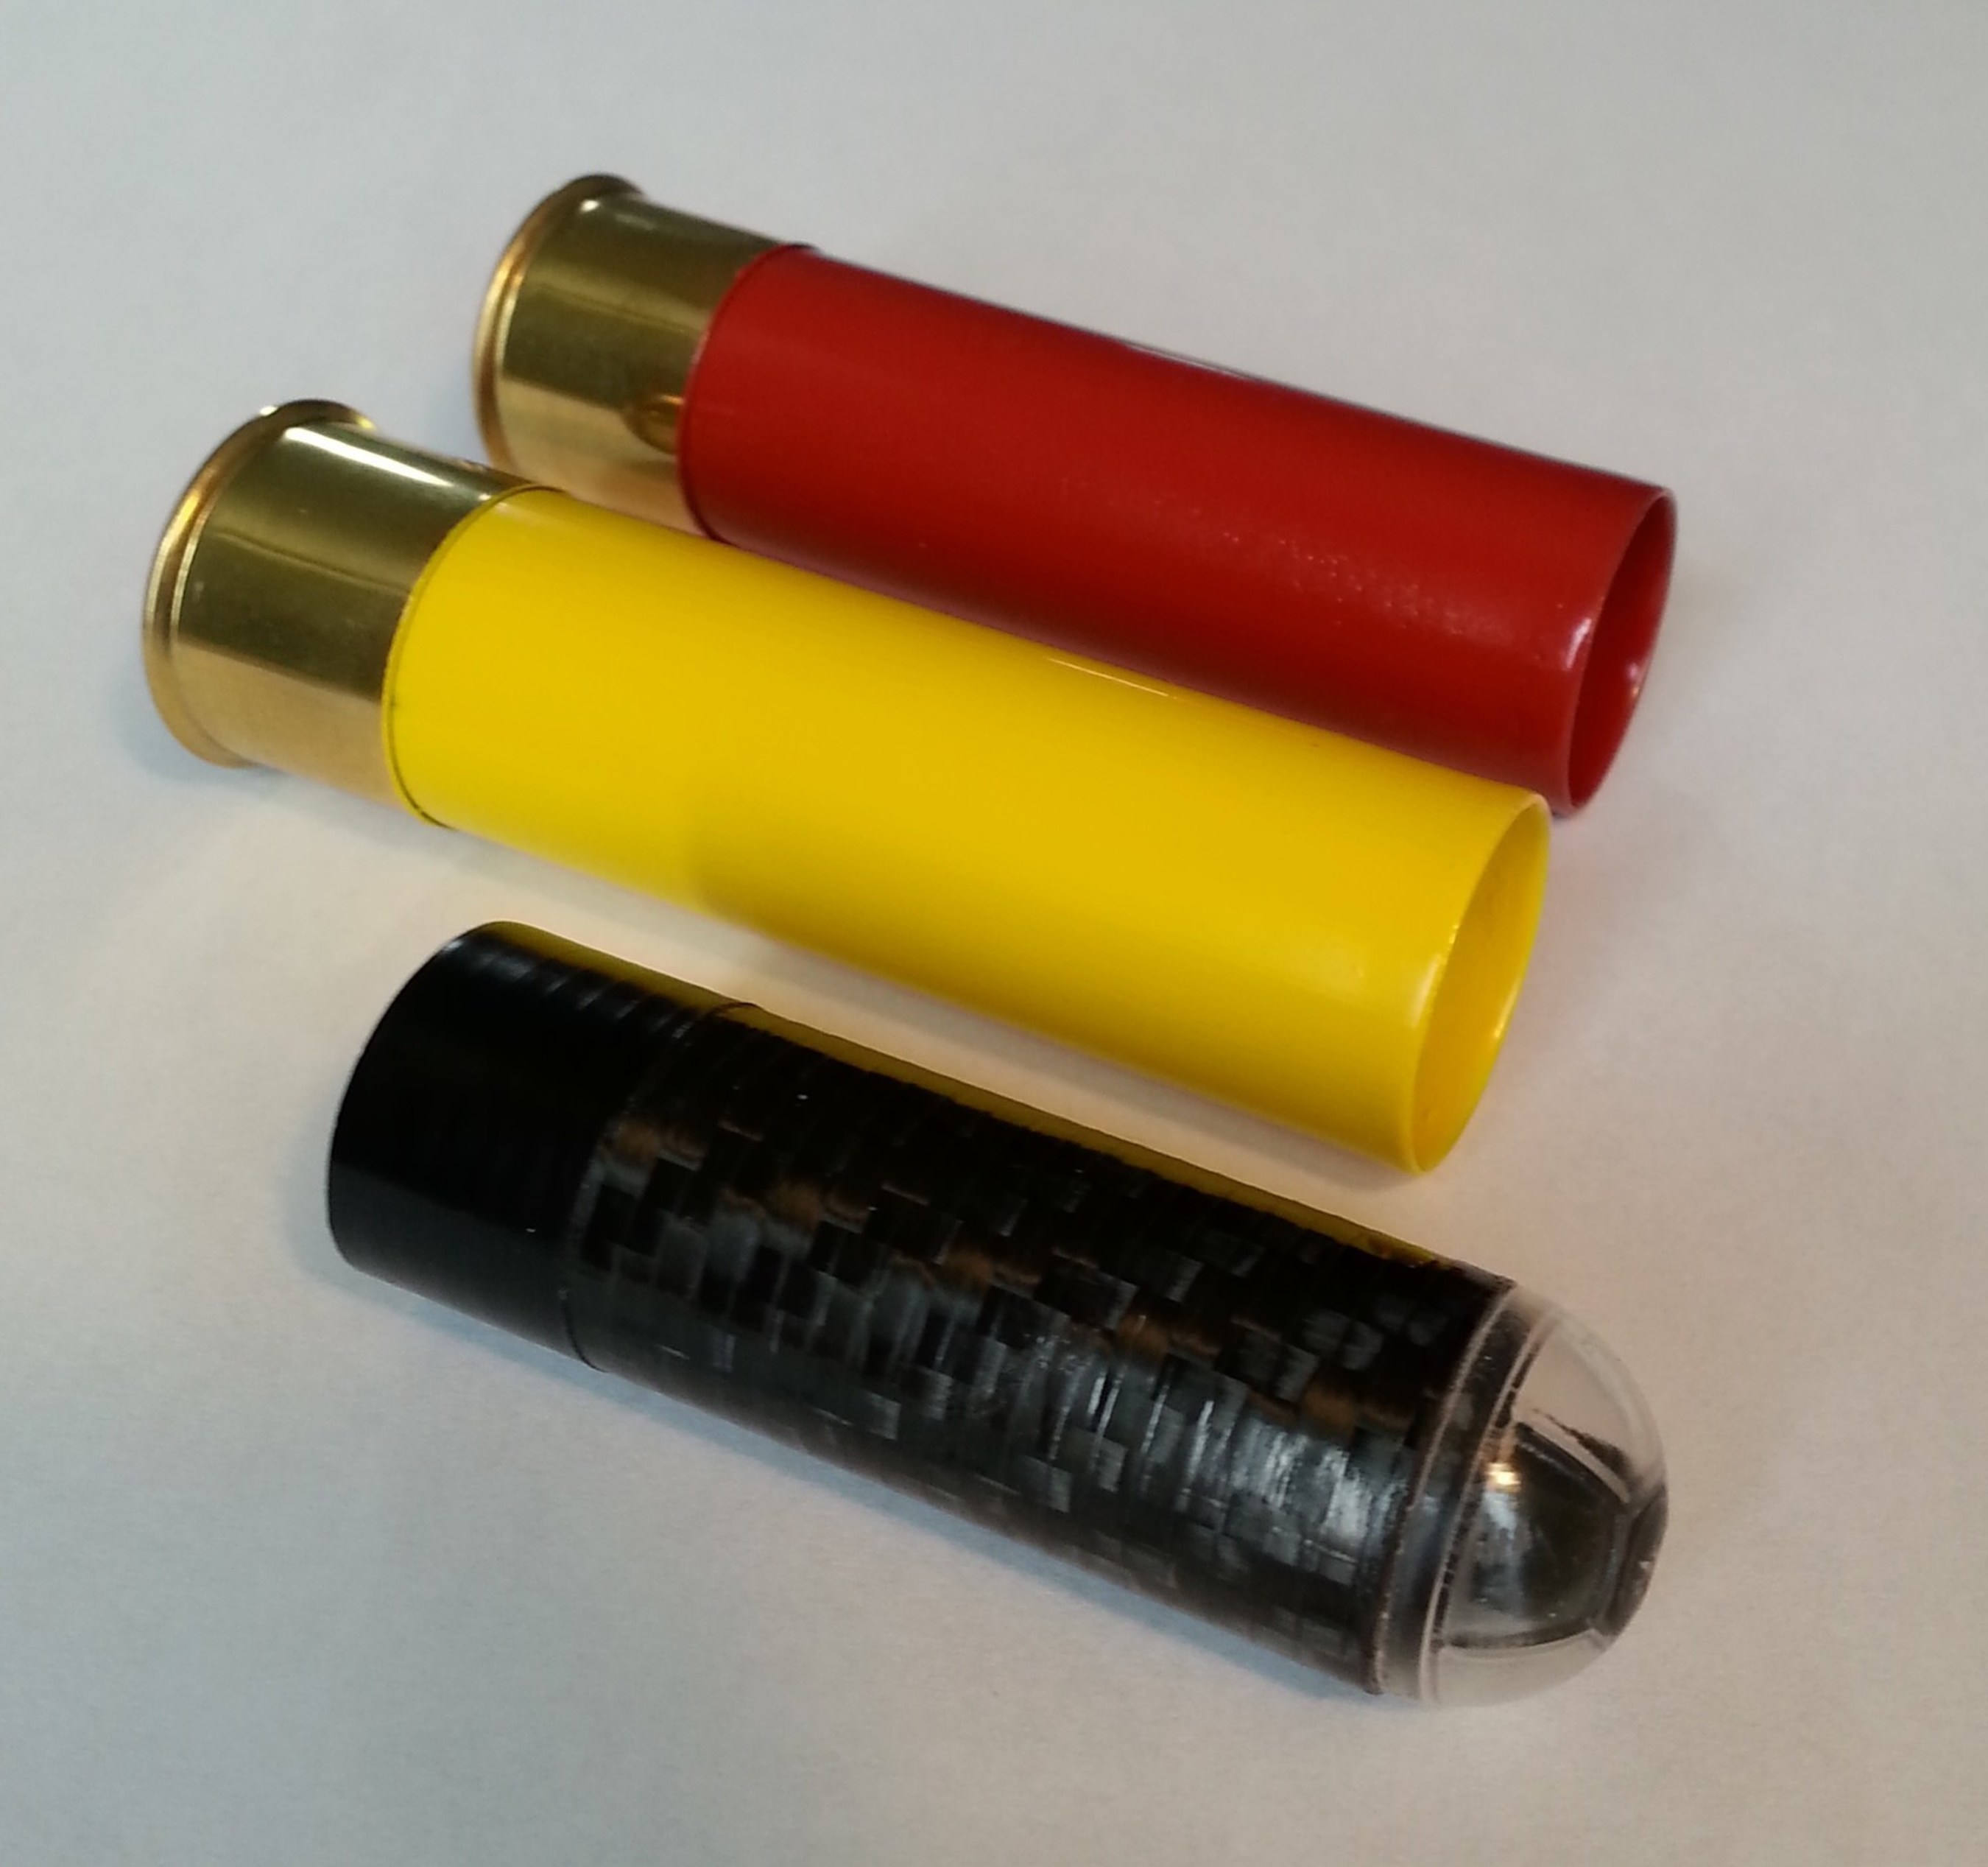 SmartRounds - The World's First Non-Lethal Smart Bullets